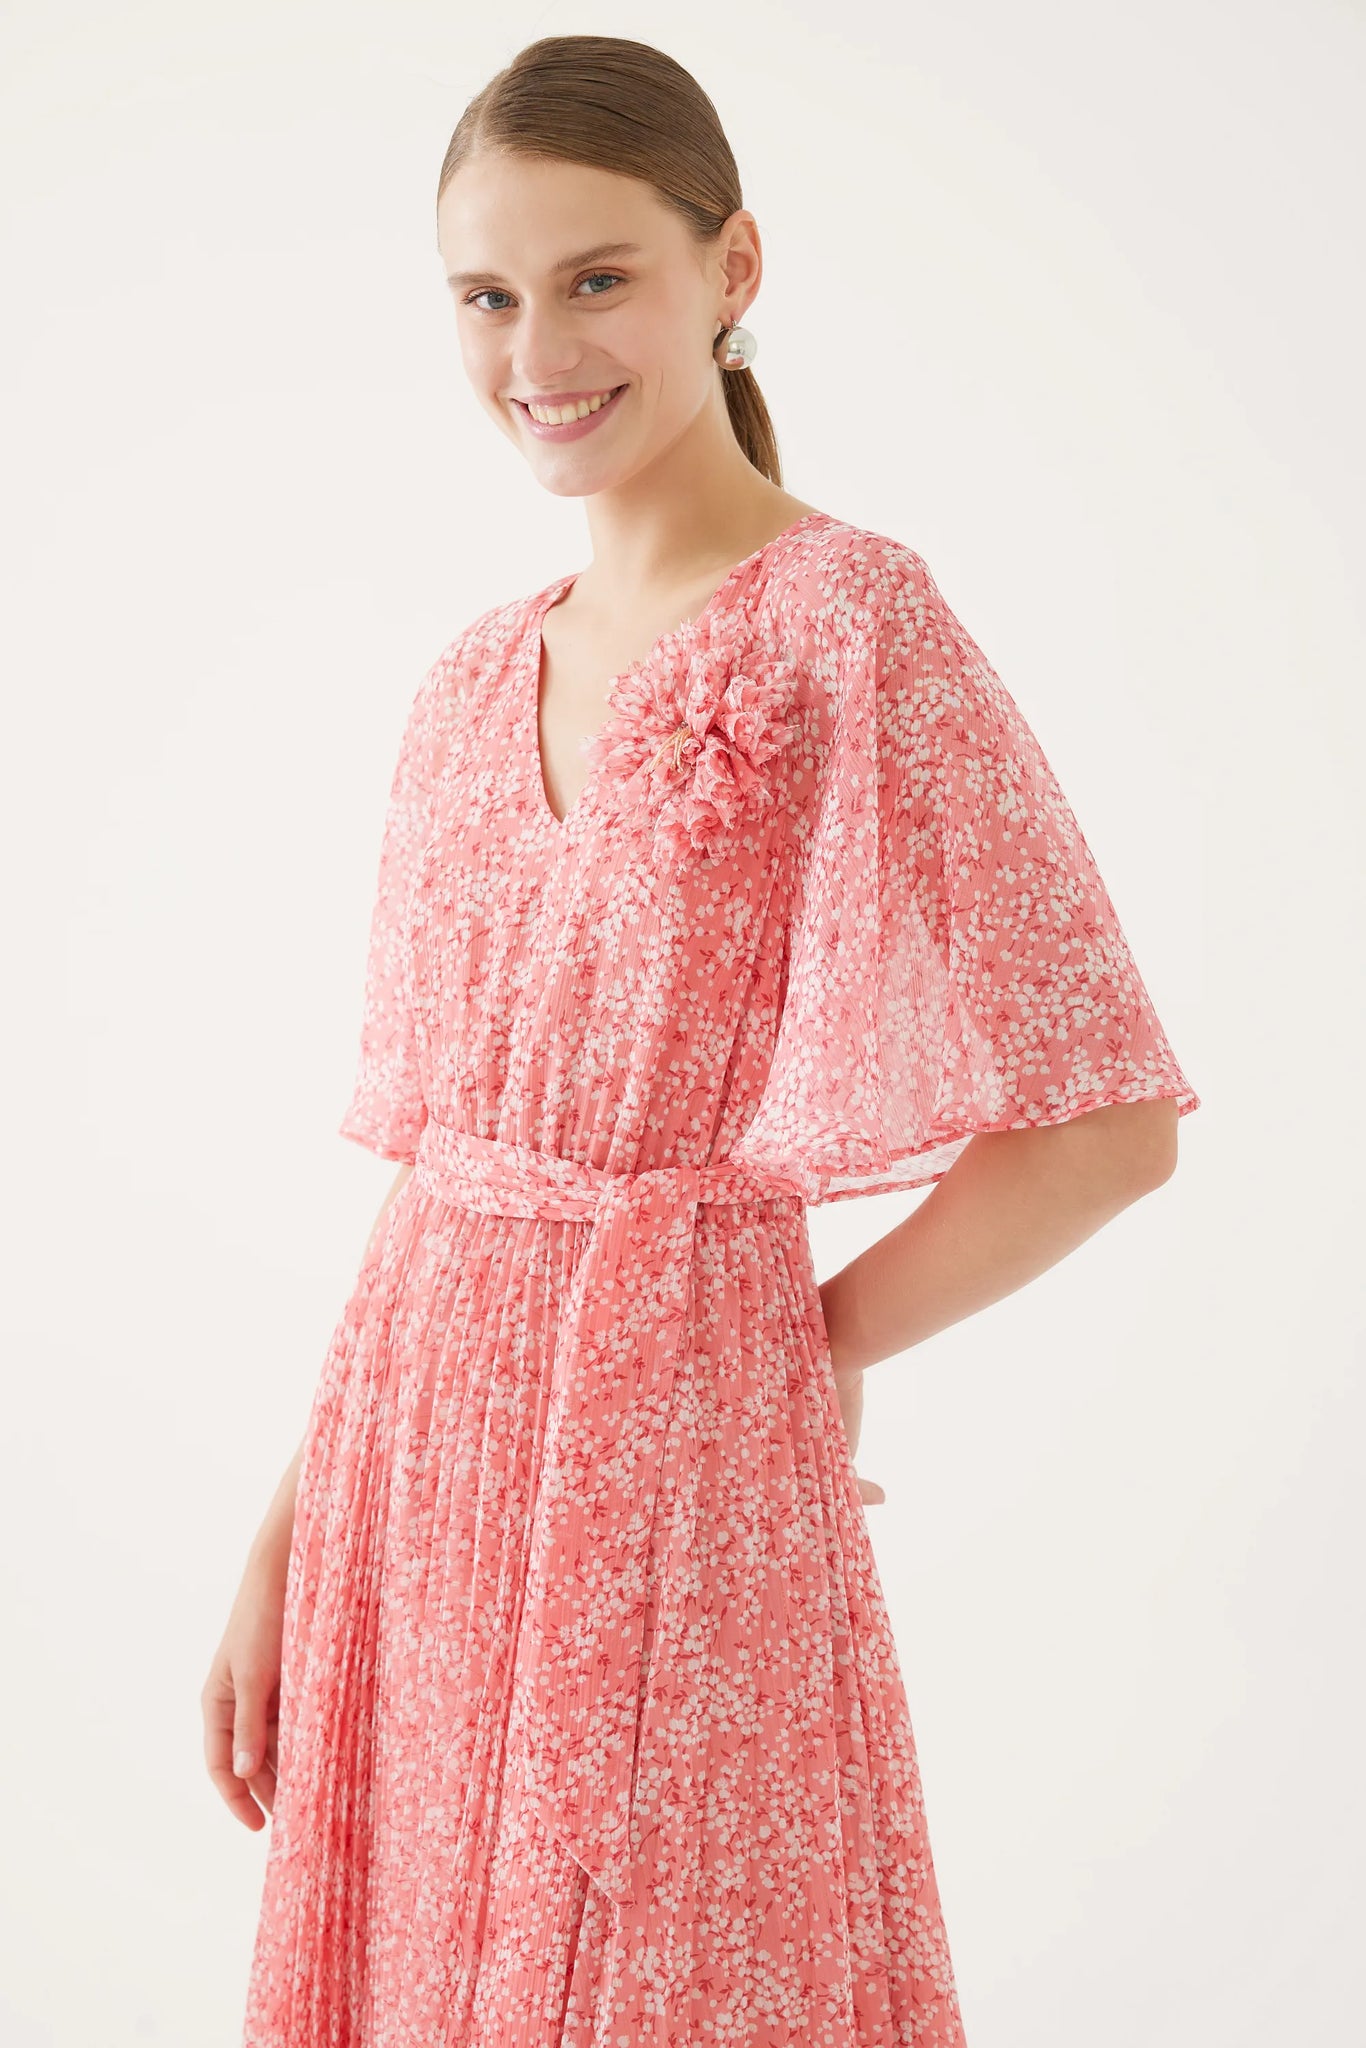 Exquise cherry blossom print pleated dress with vneck in peach

Product code 4218045